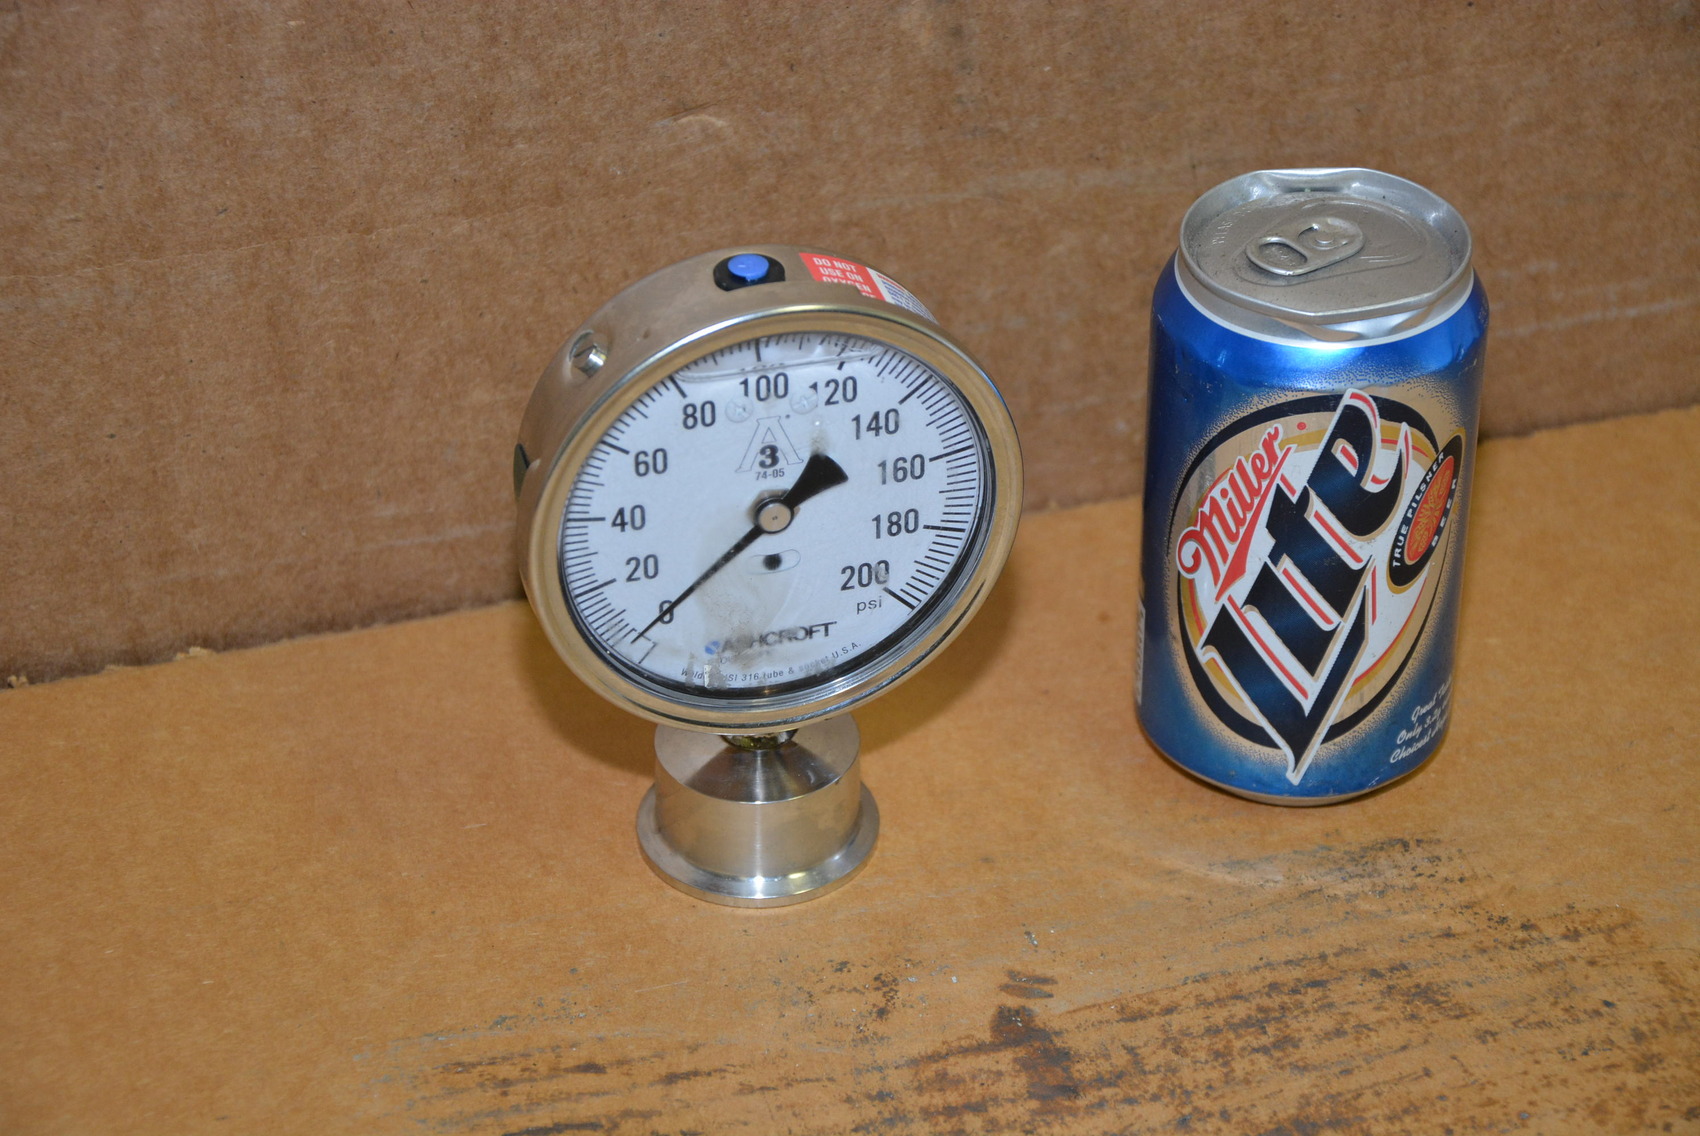 STAINLESS FOOD NSF ASHCROFT PRECISION 200 PSI PRESSURE GAUGE